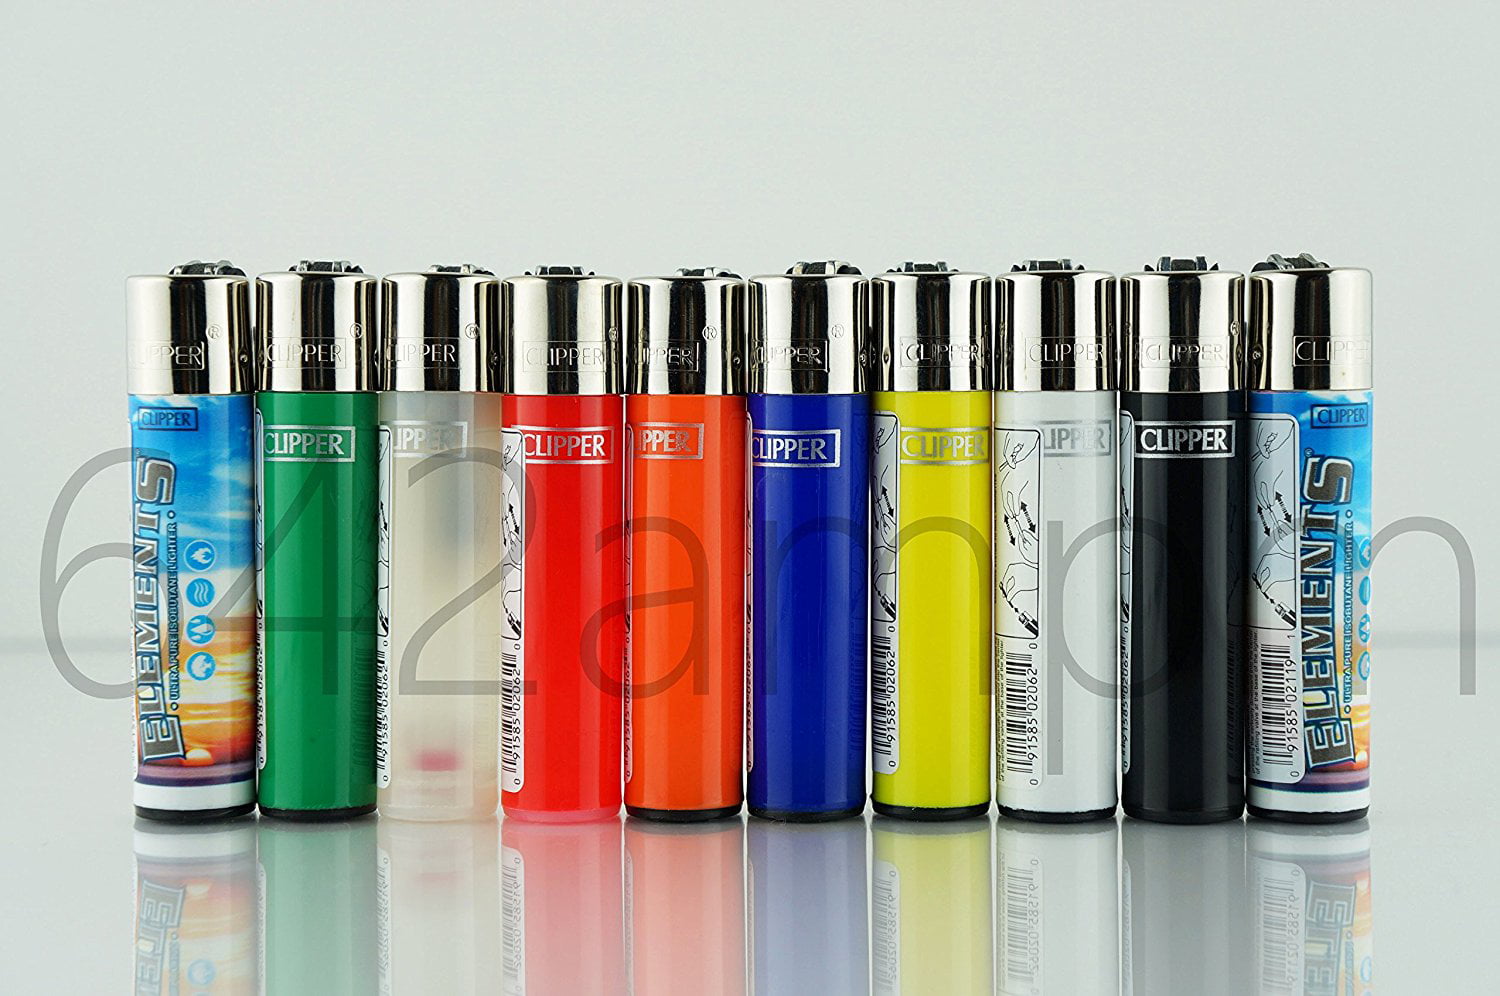 8 Ct Original Brand CLIPPER LIGHTERS Full Size Refillable Multipurpose Mix Style 